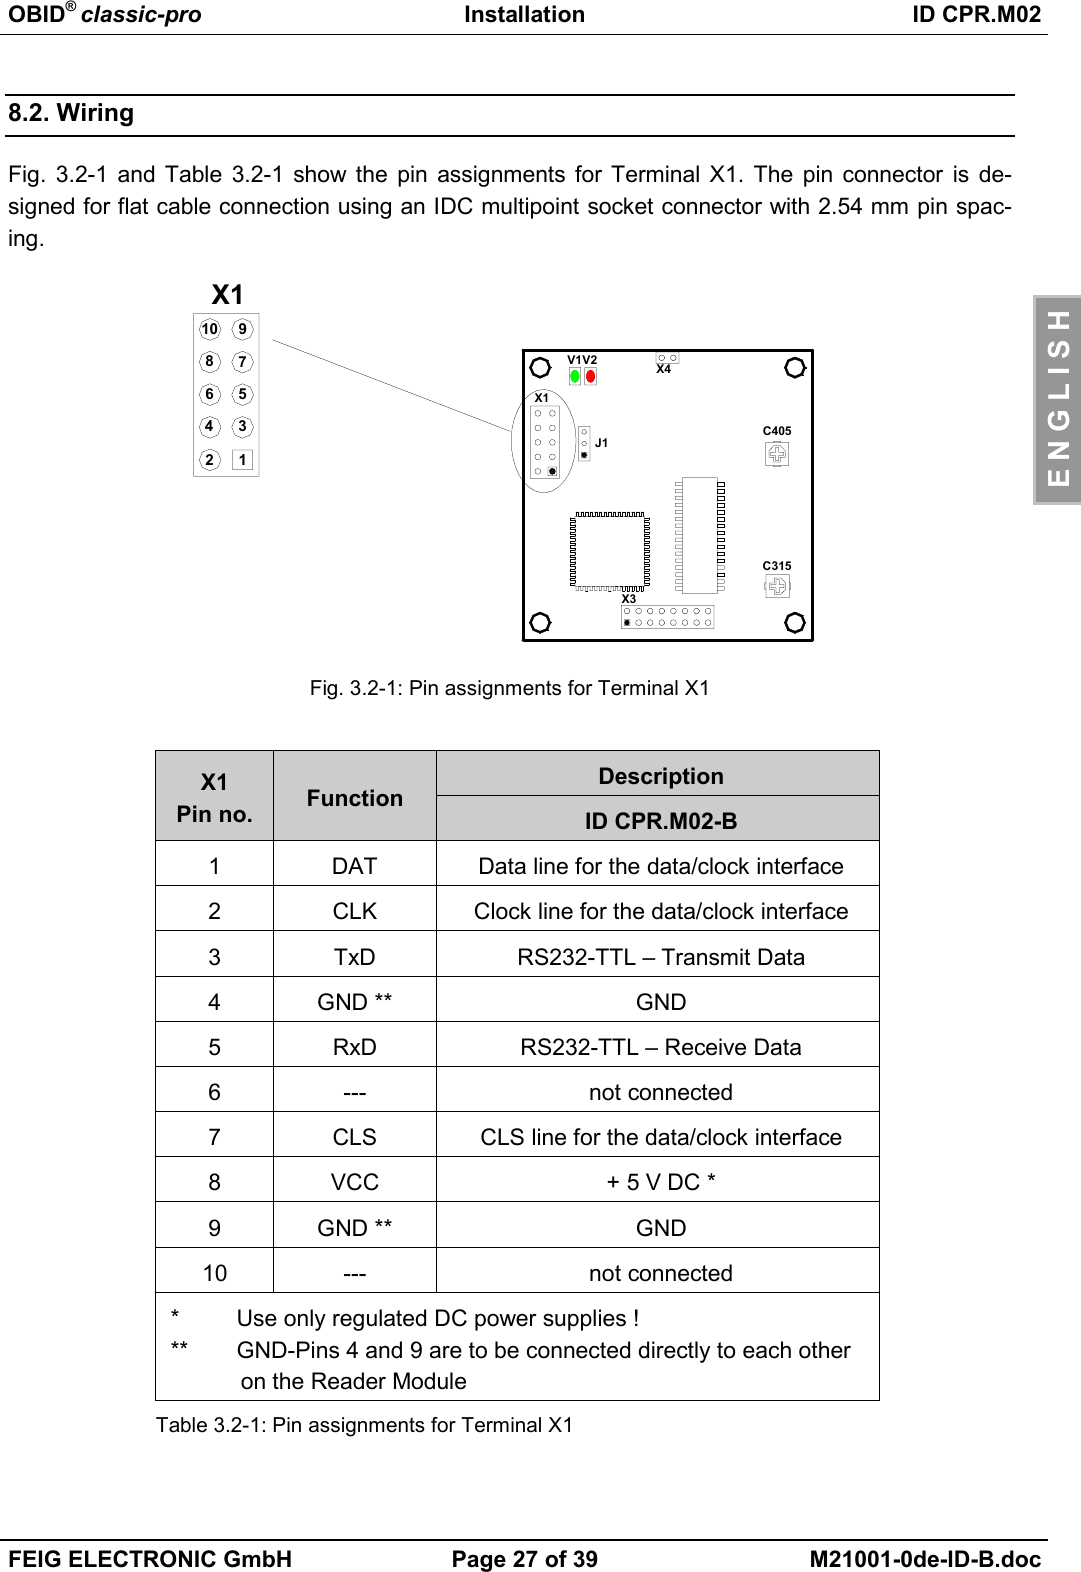 OBID® classic-pro Installation ID CPR.M02FEIG ELECTRONIC GmbH Page 27 of 39 M21001-0de-ID-B.docE N G L I S H8.2. WiringFig. 3.2-1 and Table 3.2-1 show the pin assignments for Terminal X1. The pin connector is de-signed for flat cable connection using an IDC multipoint socket connector with 2.54 mm pin spac-ing.Fig. 3.2-1: Pin assignments for Terminal X1DescriptionX1Pin no. Function ID CPR.M02-B1 DAT Data line for the data/clock interface2 CLK Clock line for the data/clock interface3 TxD RS232-TTL – Transmit Data4 GND ** GND5 RxD RS232-TTL – Receive Data6 --- not connected7 CLS CLS line for the data/clock interface8 VCC + 5 V DC *9 GND ** GND10 --- not connected*  Use only regulated DC power supplies !**  GND-Pins 4 and 9 are to be connected directly to each other           on the Reader ModuleTable 3.2-1: Pin assignments for Terminal X1X1J1V2V1C315X112435796810X3X4C405